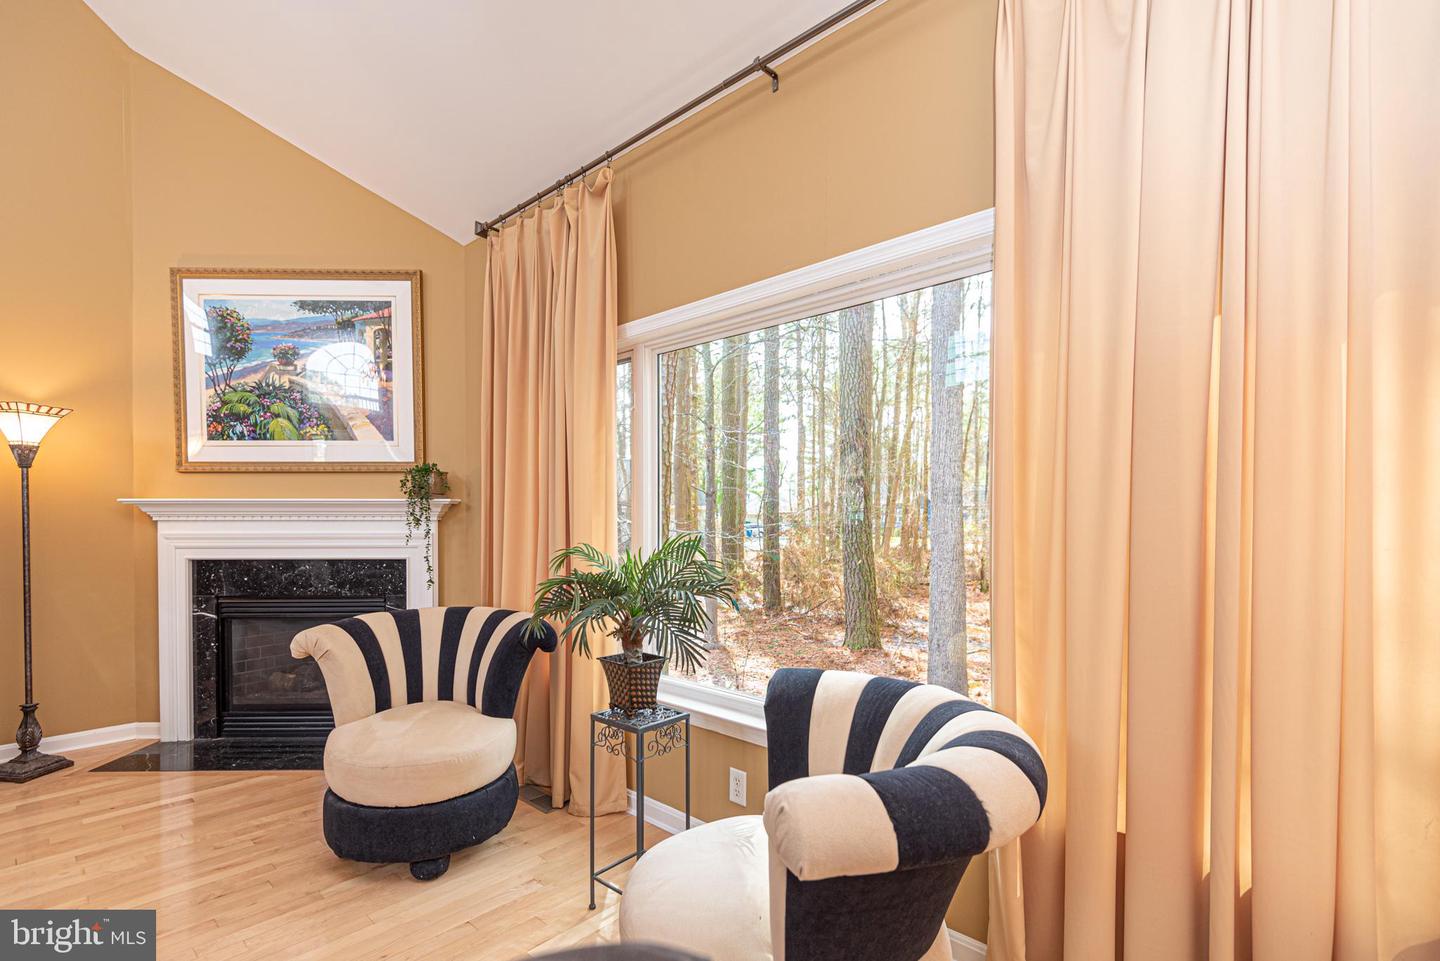 MDWO2019426-802903995342-2024-03-08-00-14-50 106 Pine Forest Dr | Berlin, MD Real Estate For Sale | MLS# Mdwo2019426  - 1st Choice Properties